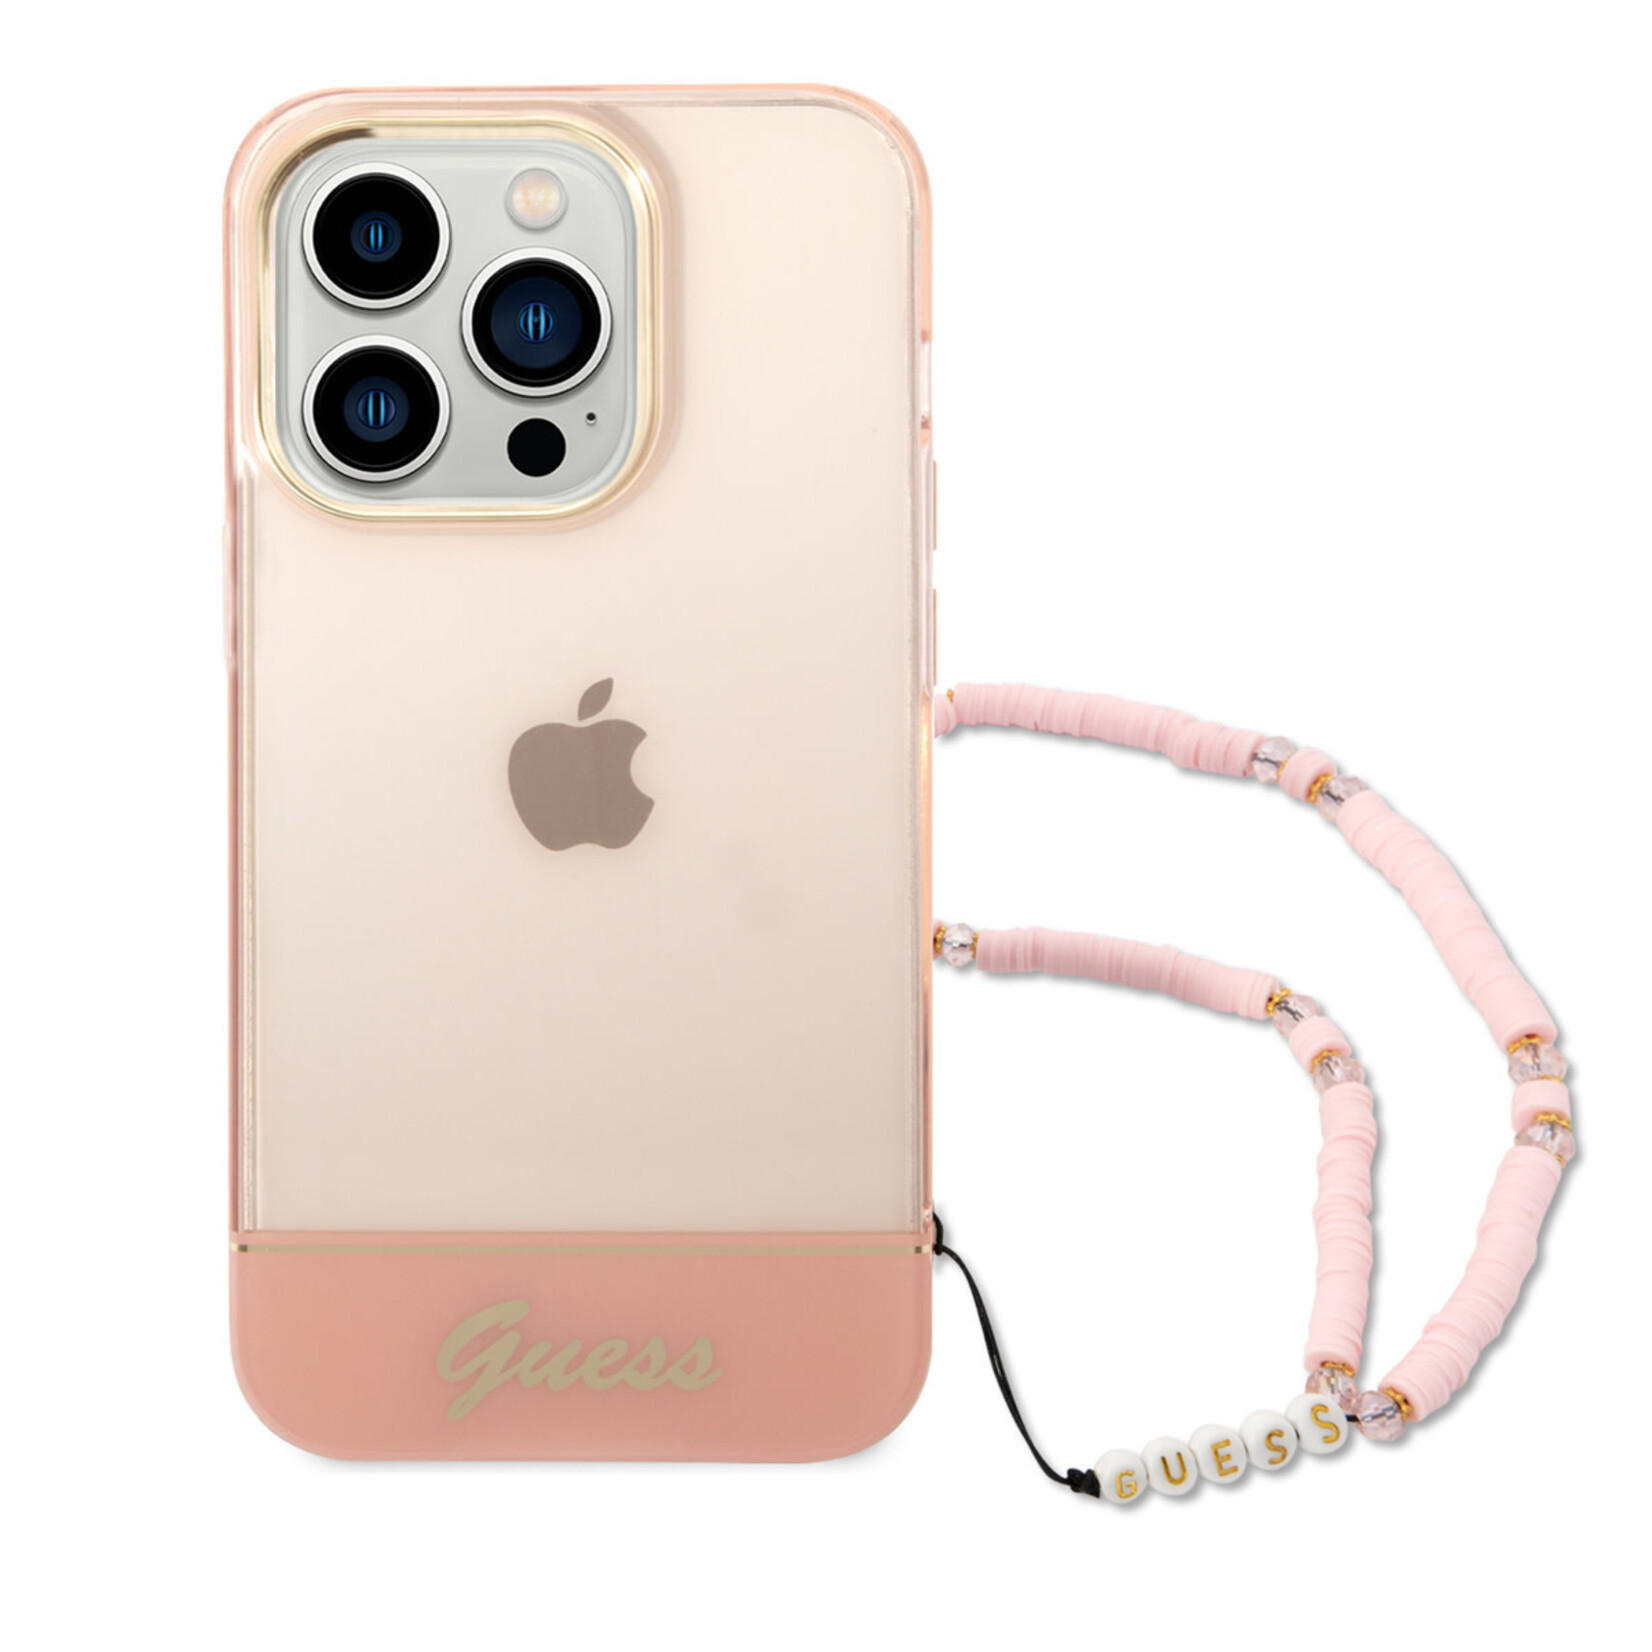 Guess Guess Transparante Roze TPU Back Cover Smartphonehoesje voor Apple iPhone 14 Pro - Bescherming & Stijl